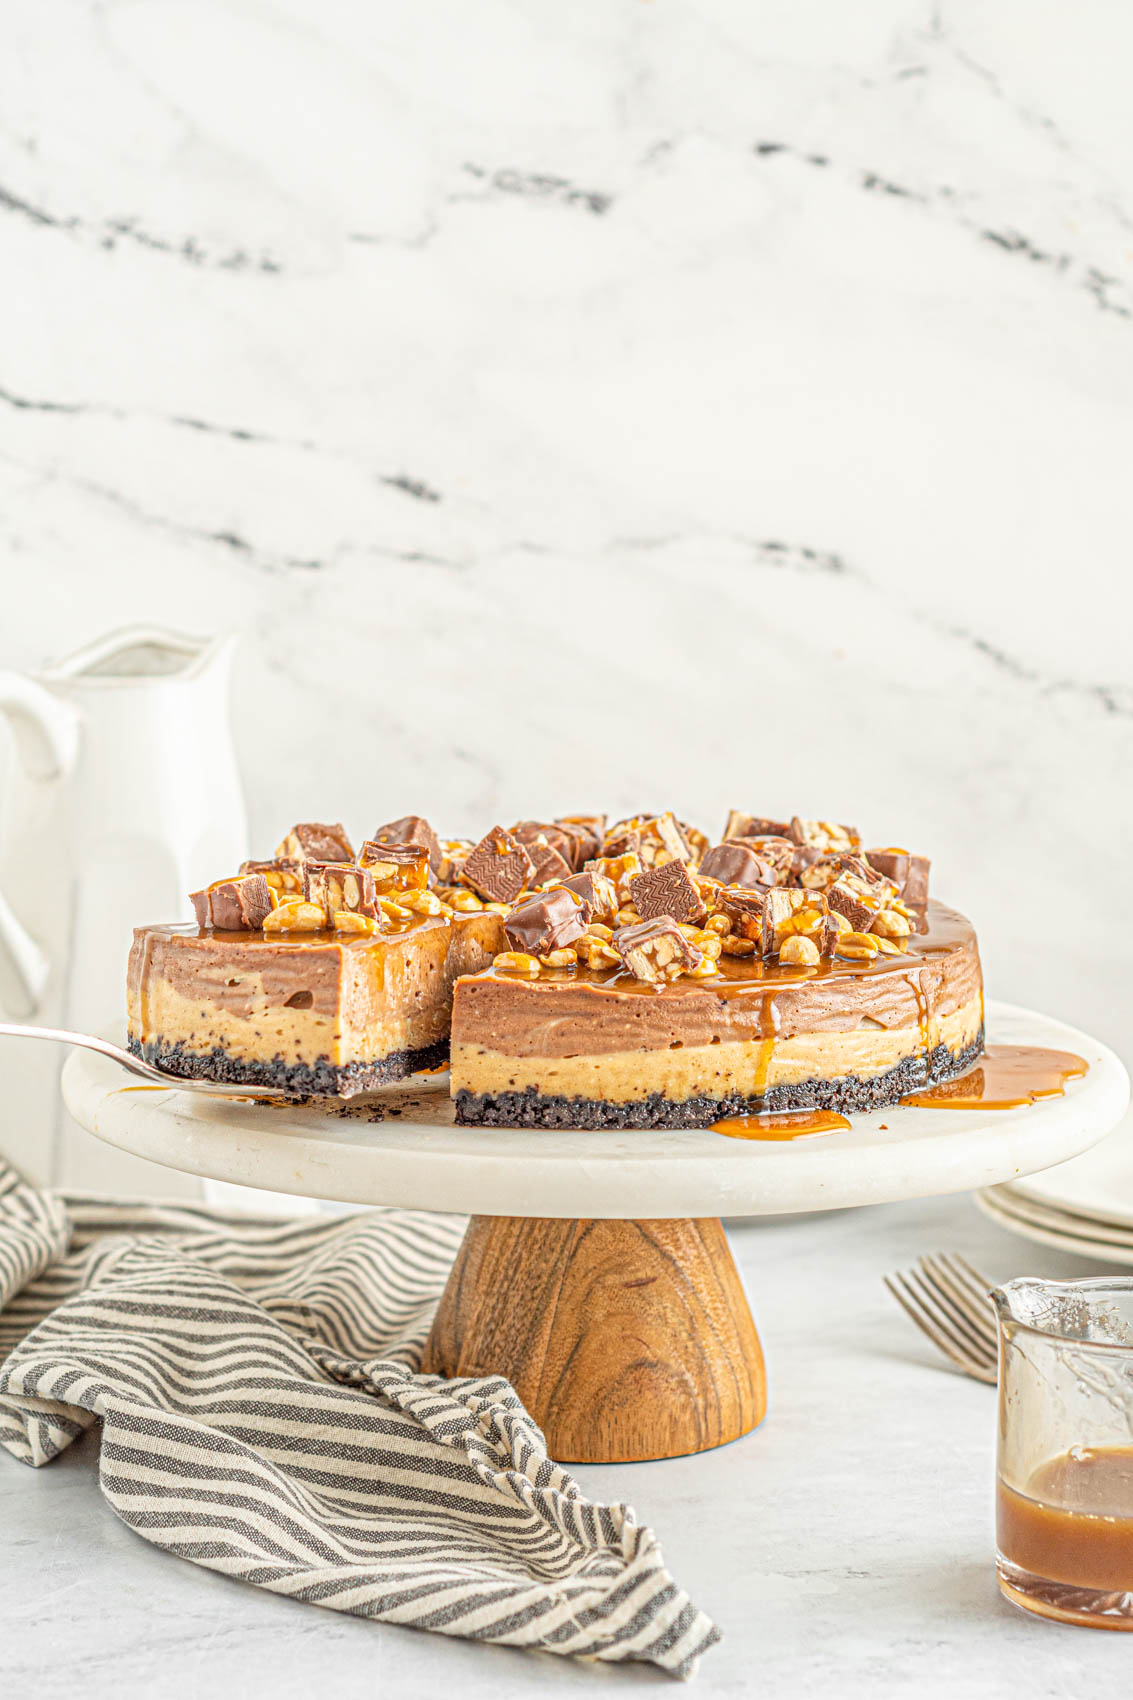 triple layer Snickers cheesecake on a cake stand next to a glass jar of caramel sauce